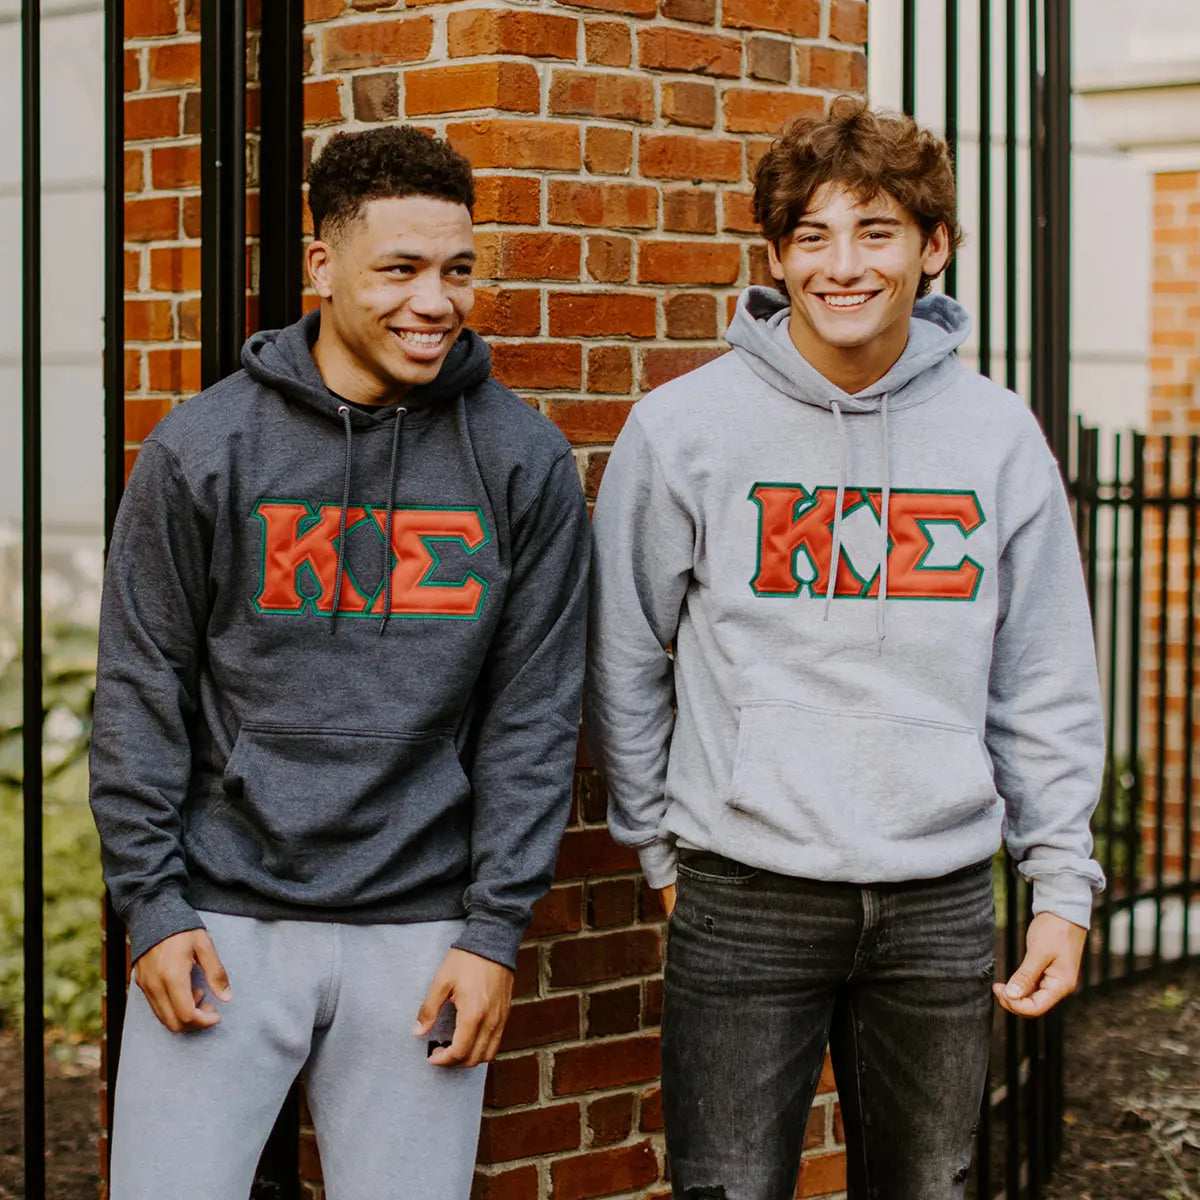 Kappa Sig Dark with Heather Sigma – Store Letters Official On Sewn Hoodie Kappa Greek